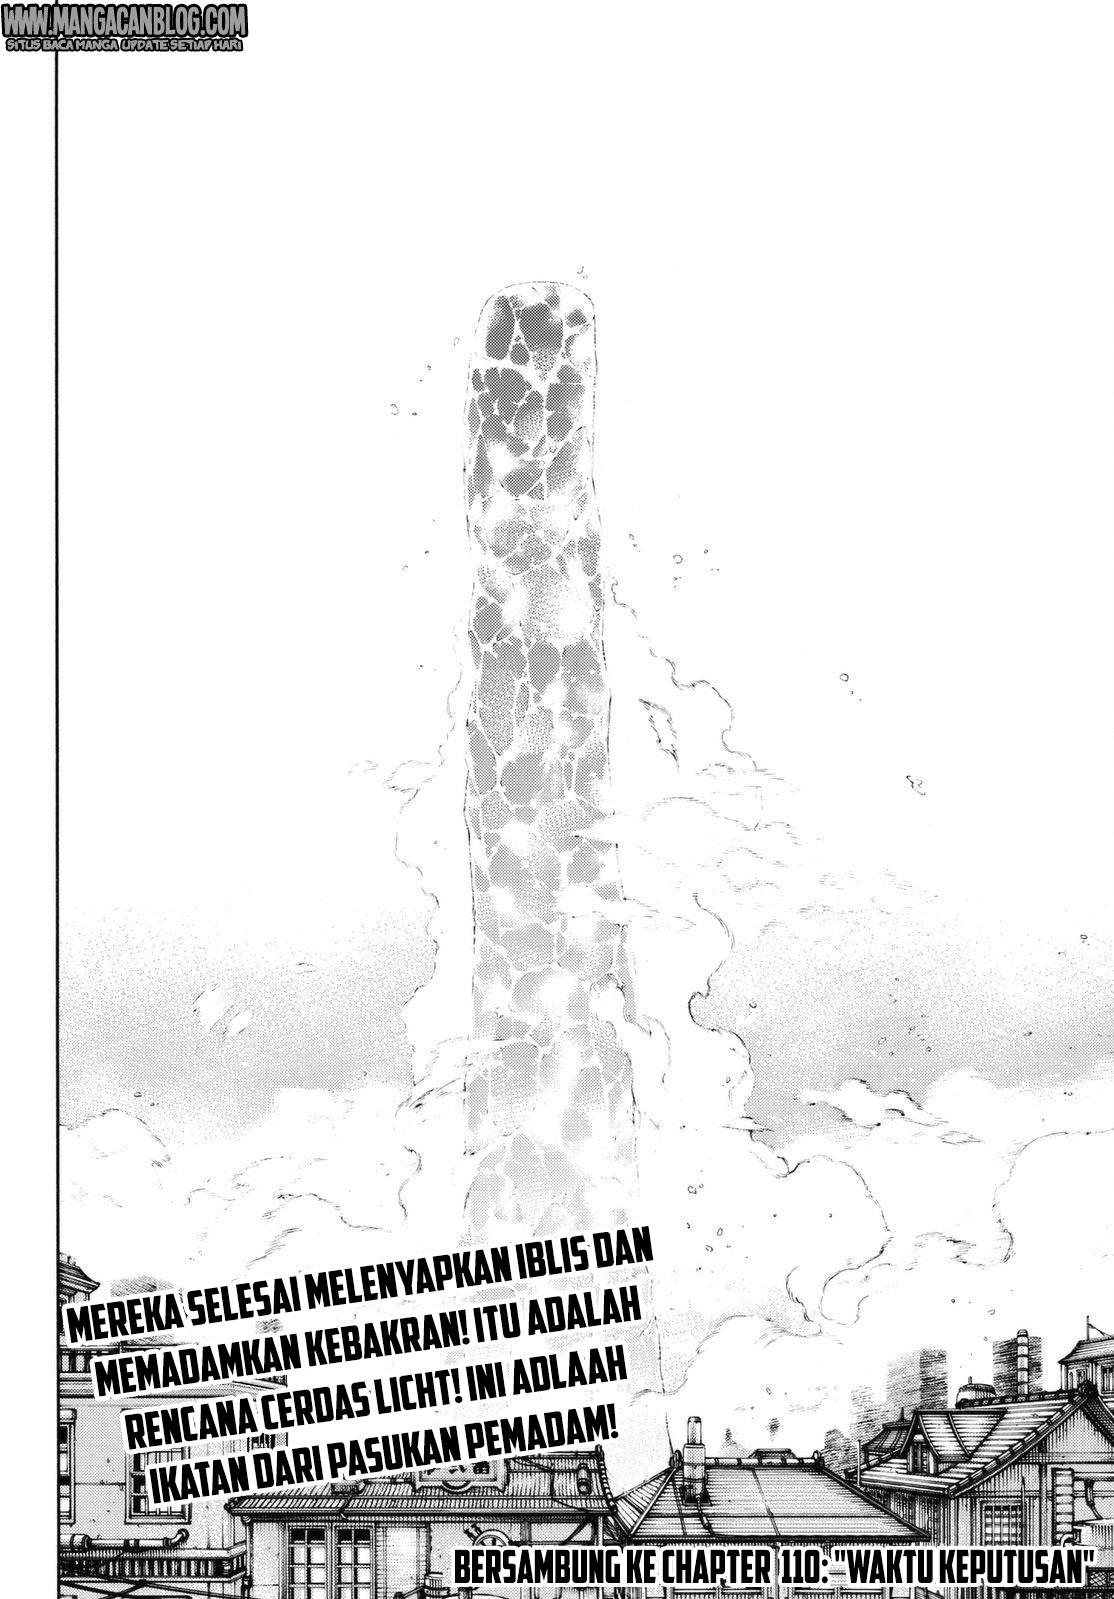 Fire Brigade of Flames Chapter 109